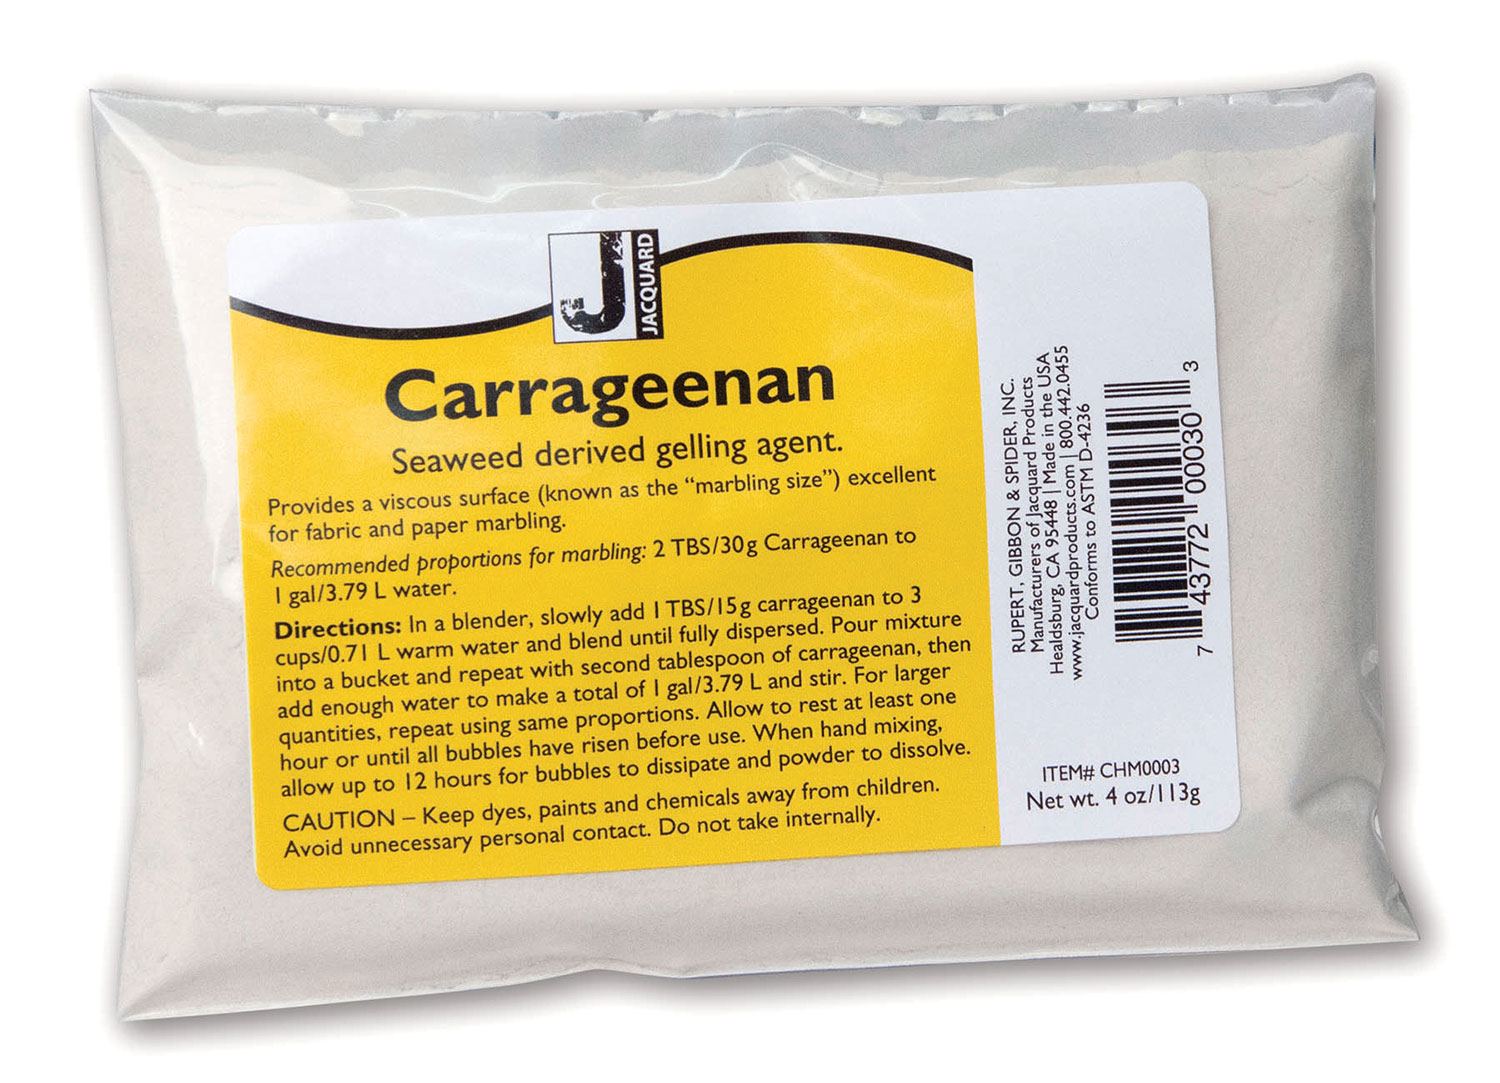 Jacquard Products — Jacquard Products - Chemicals - Carrageenan